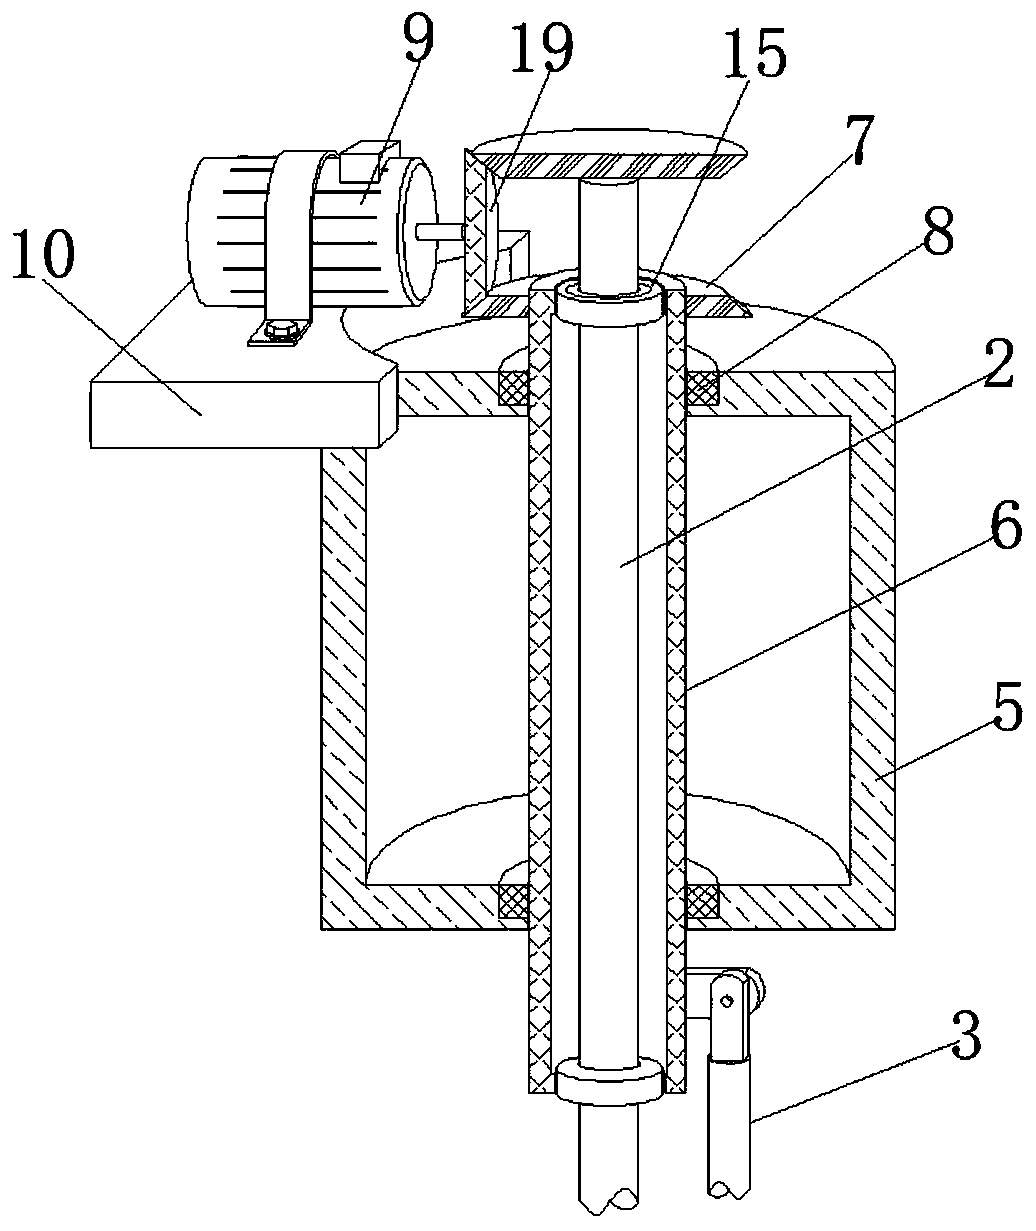 Deep processing pulp mixing device for paper pulp remaking